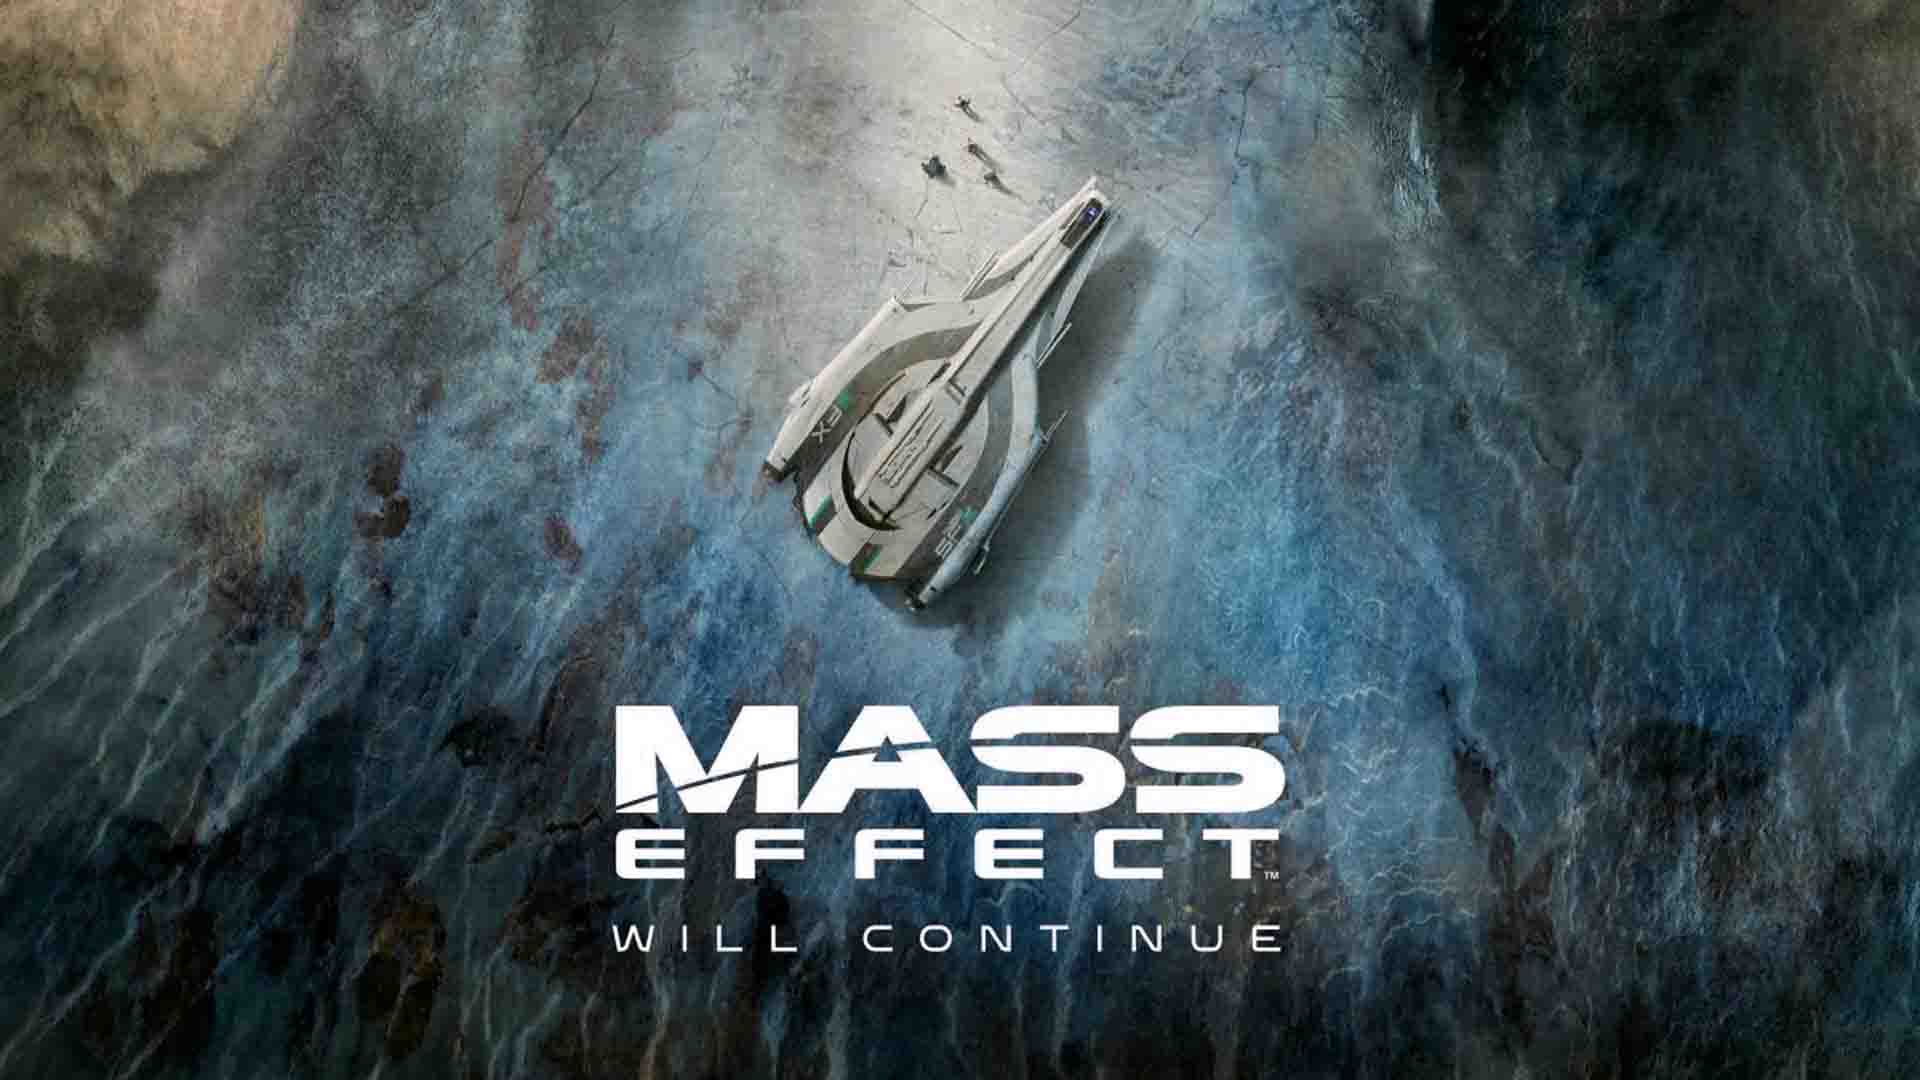 Mass Effect dazzles with a new poster